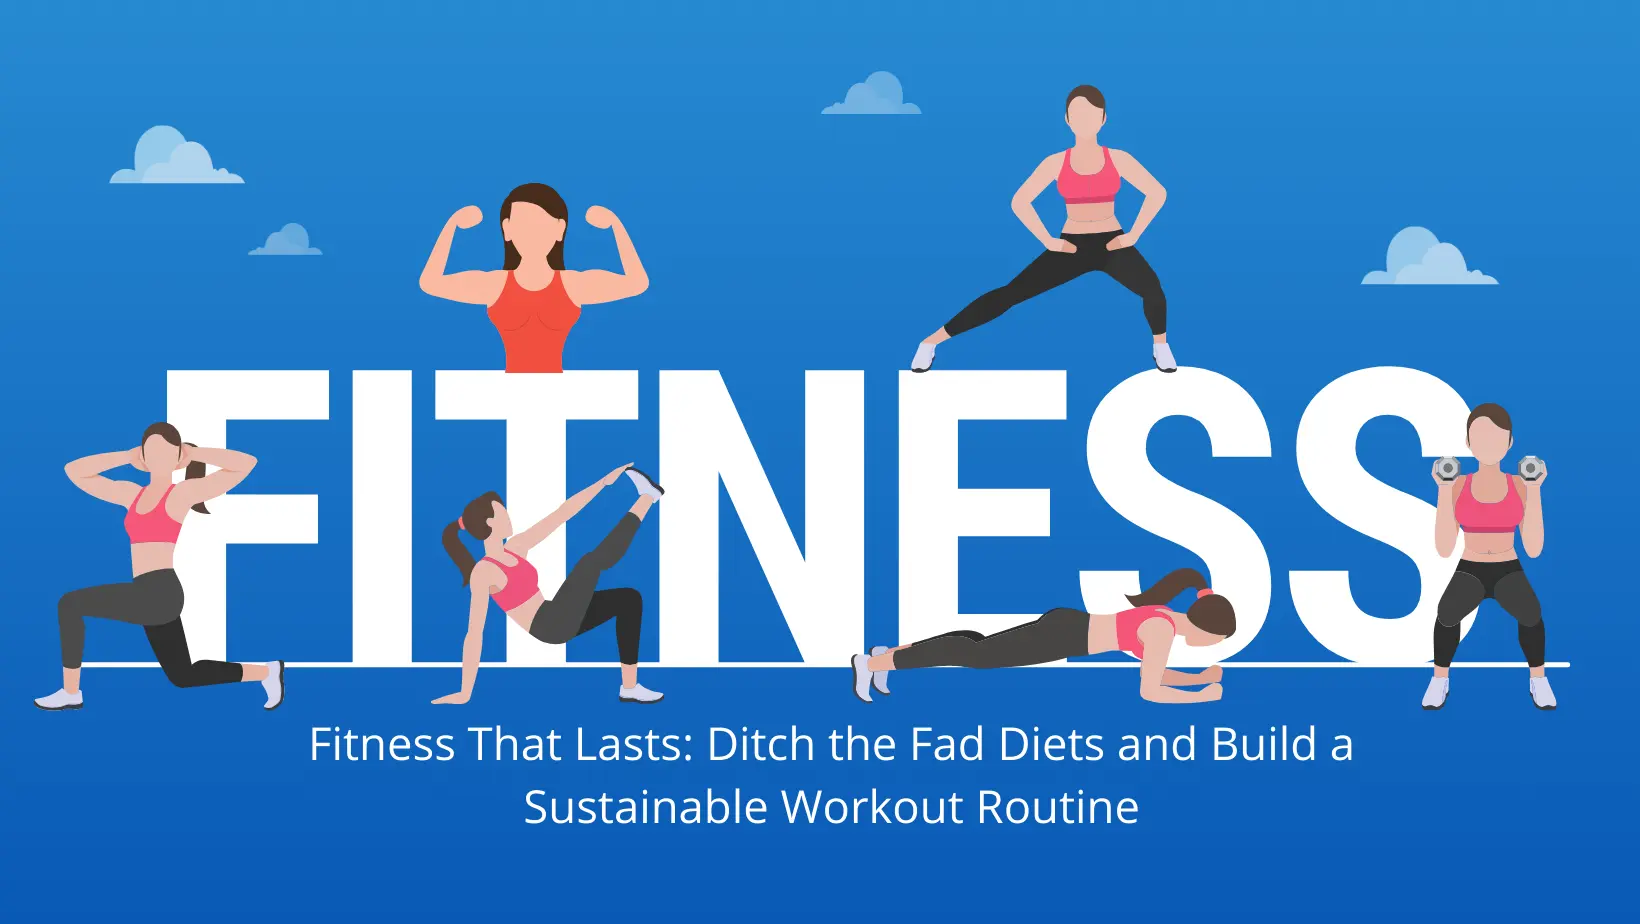 Fitness That Lasts Ditch the Fad Diets and Build a Sustainable Workout Routine